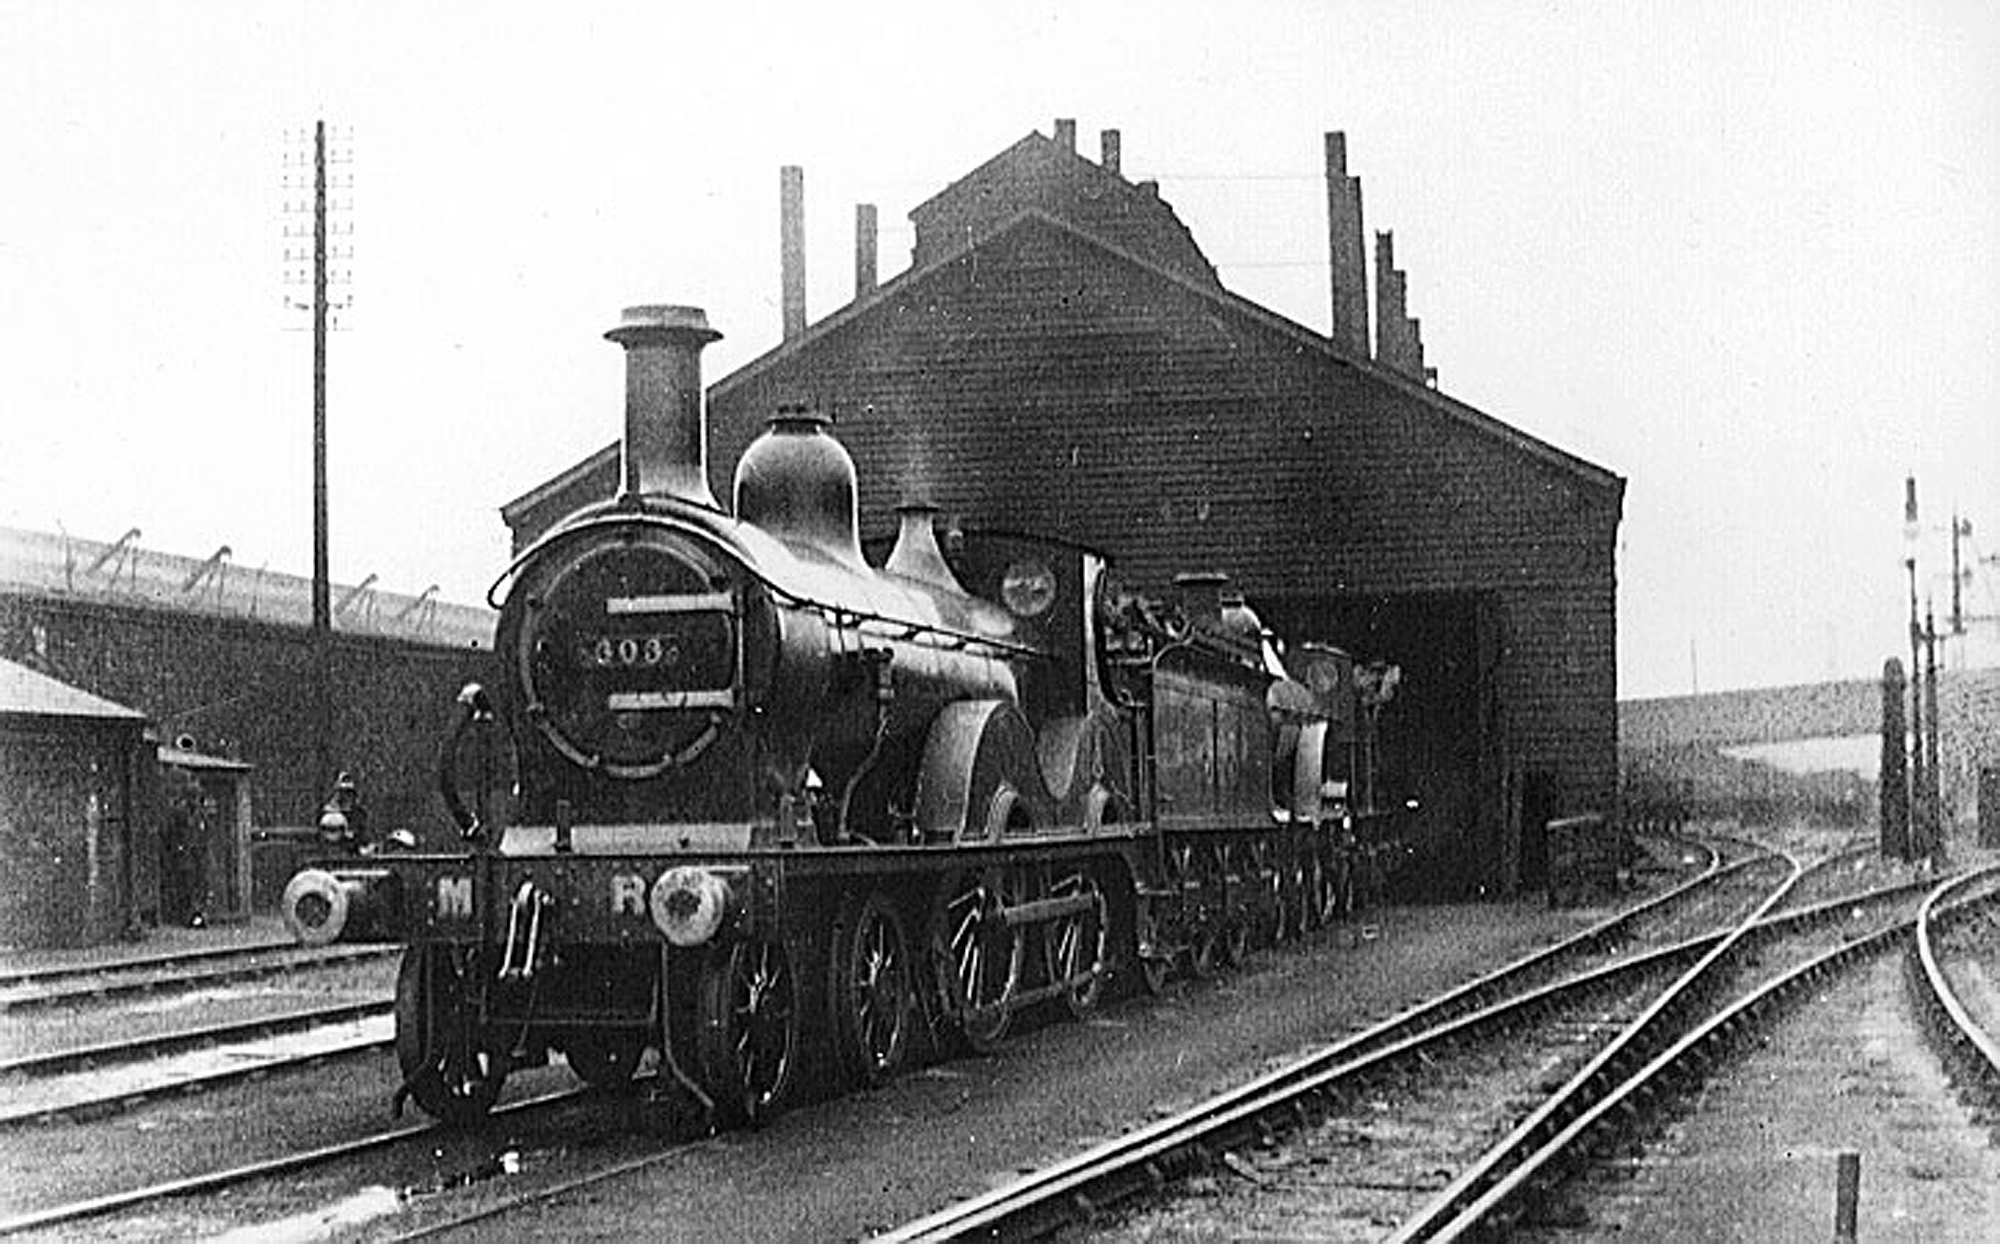 Brunswick shed with MR 603, circa.1913 (c. R. Griffiths)